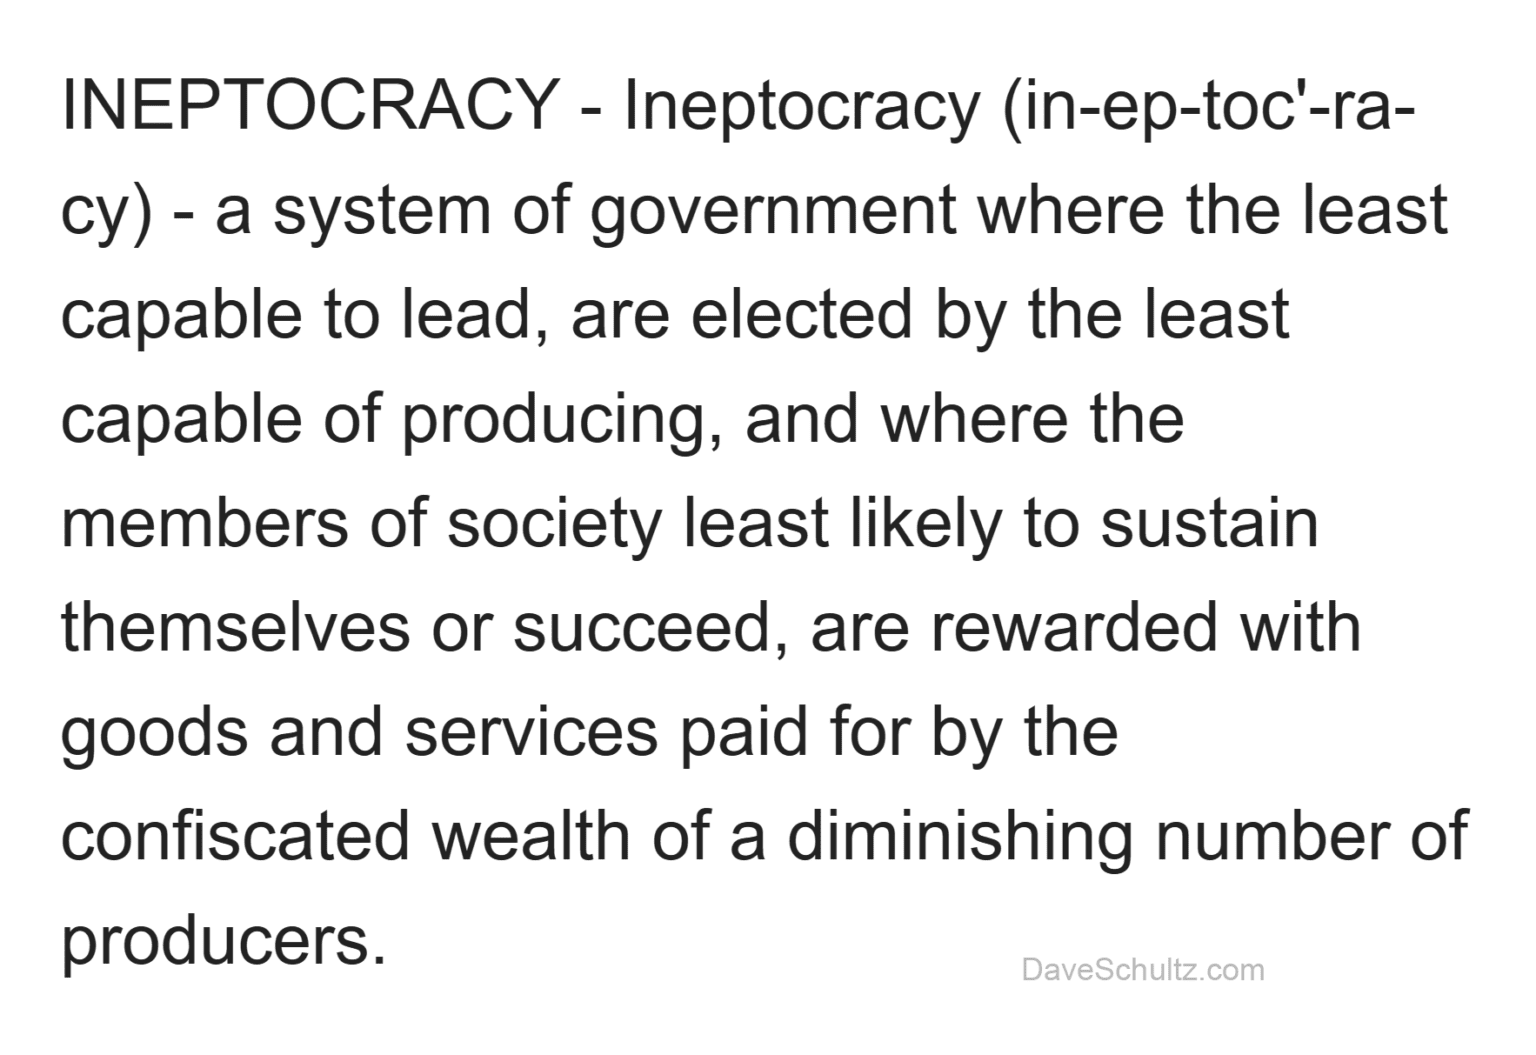 Definition on Ineptocracy